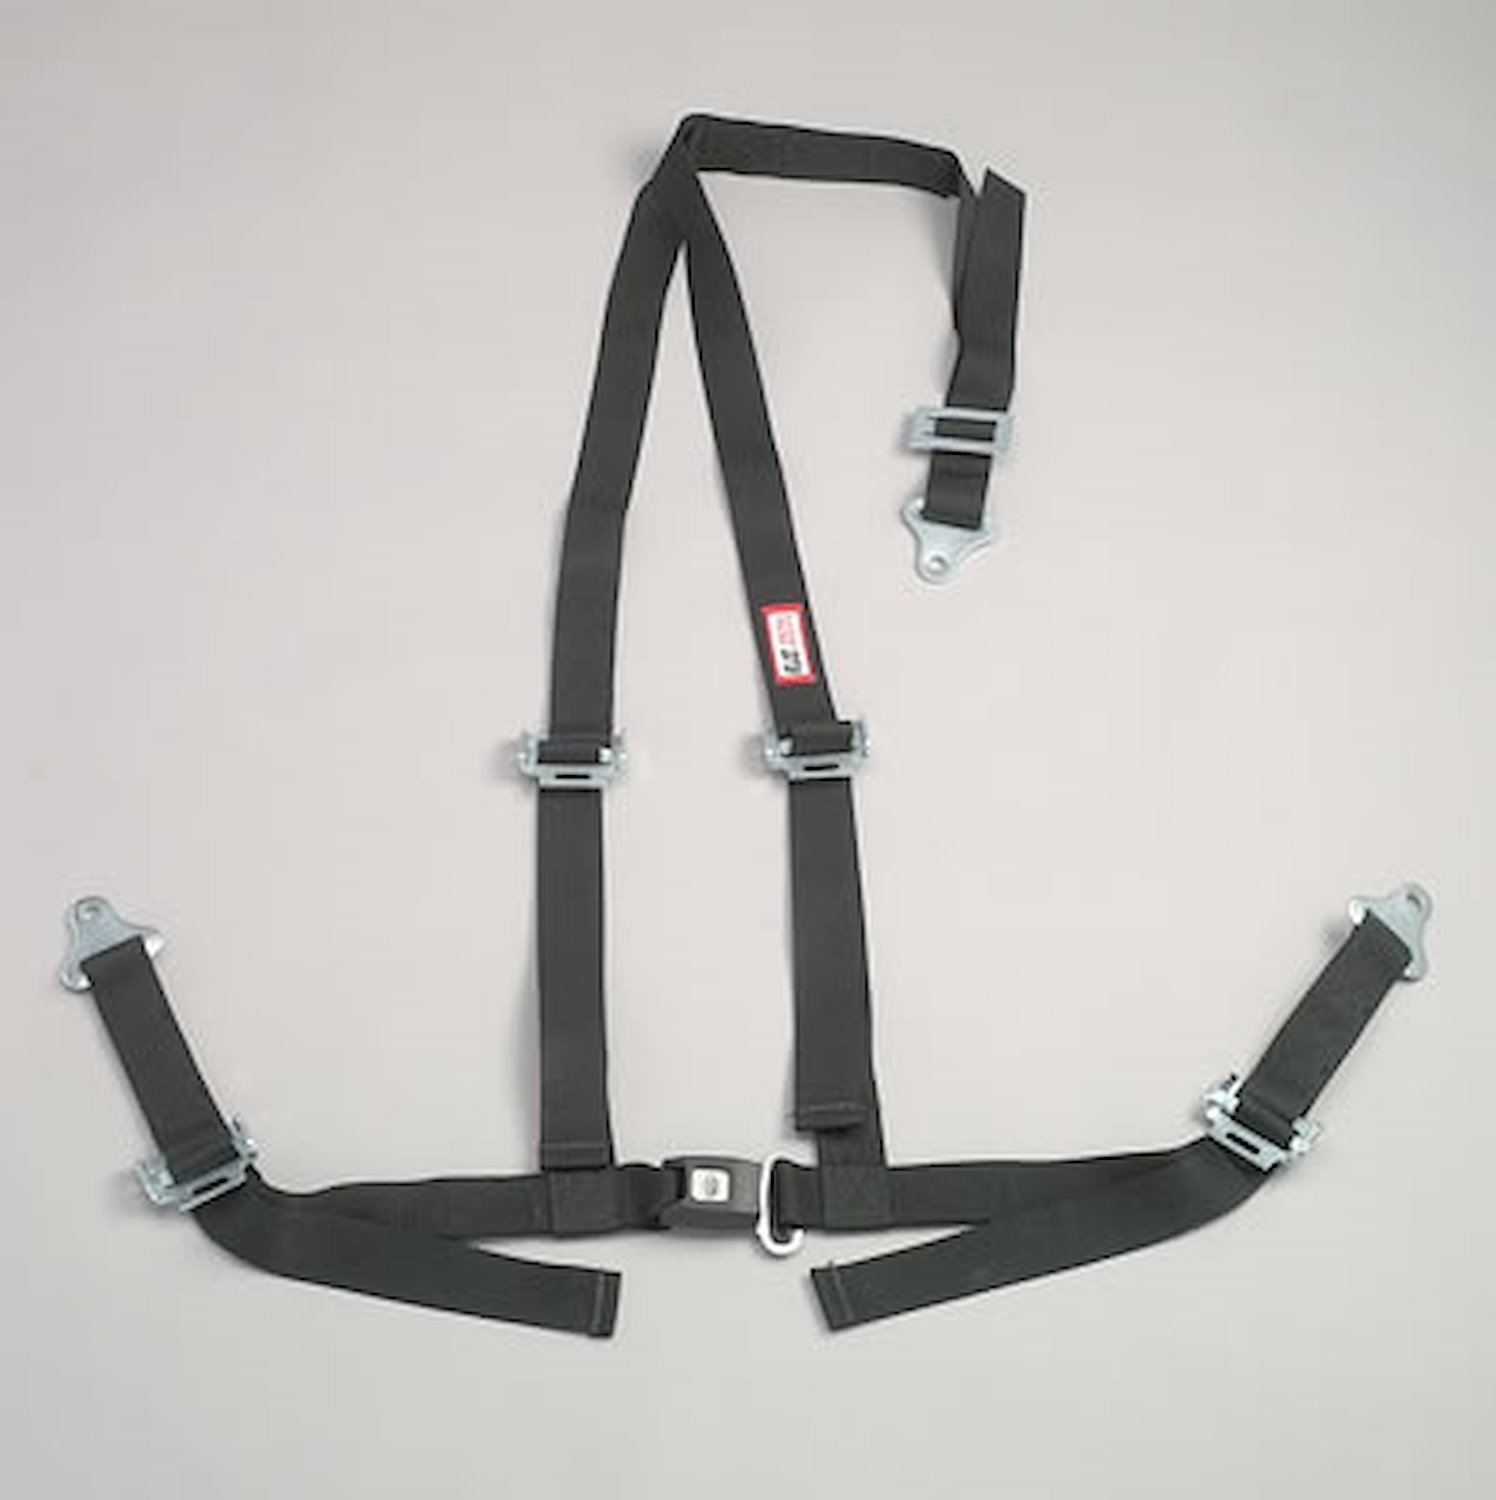 NON-SFI B&T HARNESS 2 PULL DOWN Lap Belt 2 S.H. INDIVIDUAL FLOOR Mount ALL WRAP ENDS RED